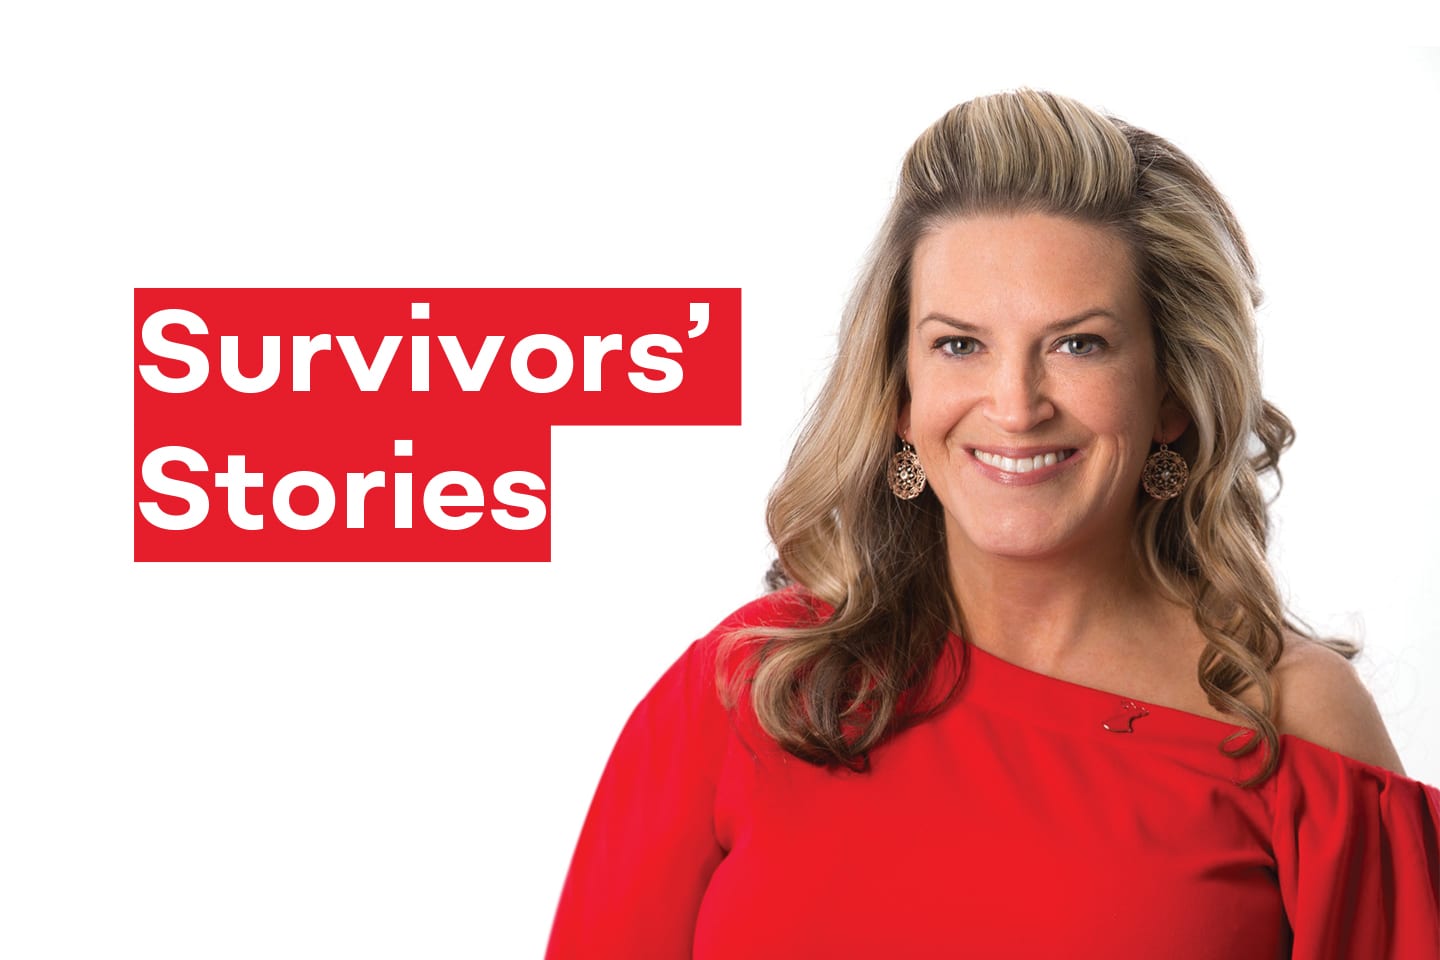 heart disease and stroke survivor stories in chattanooga